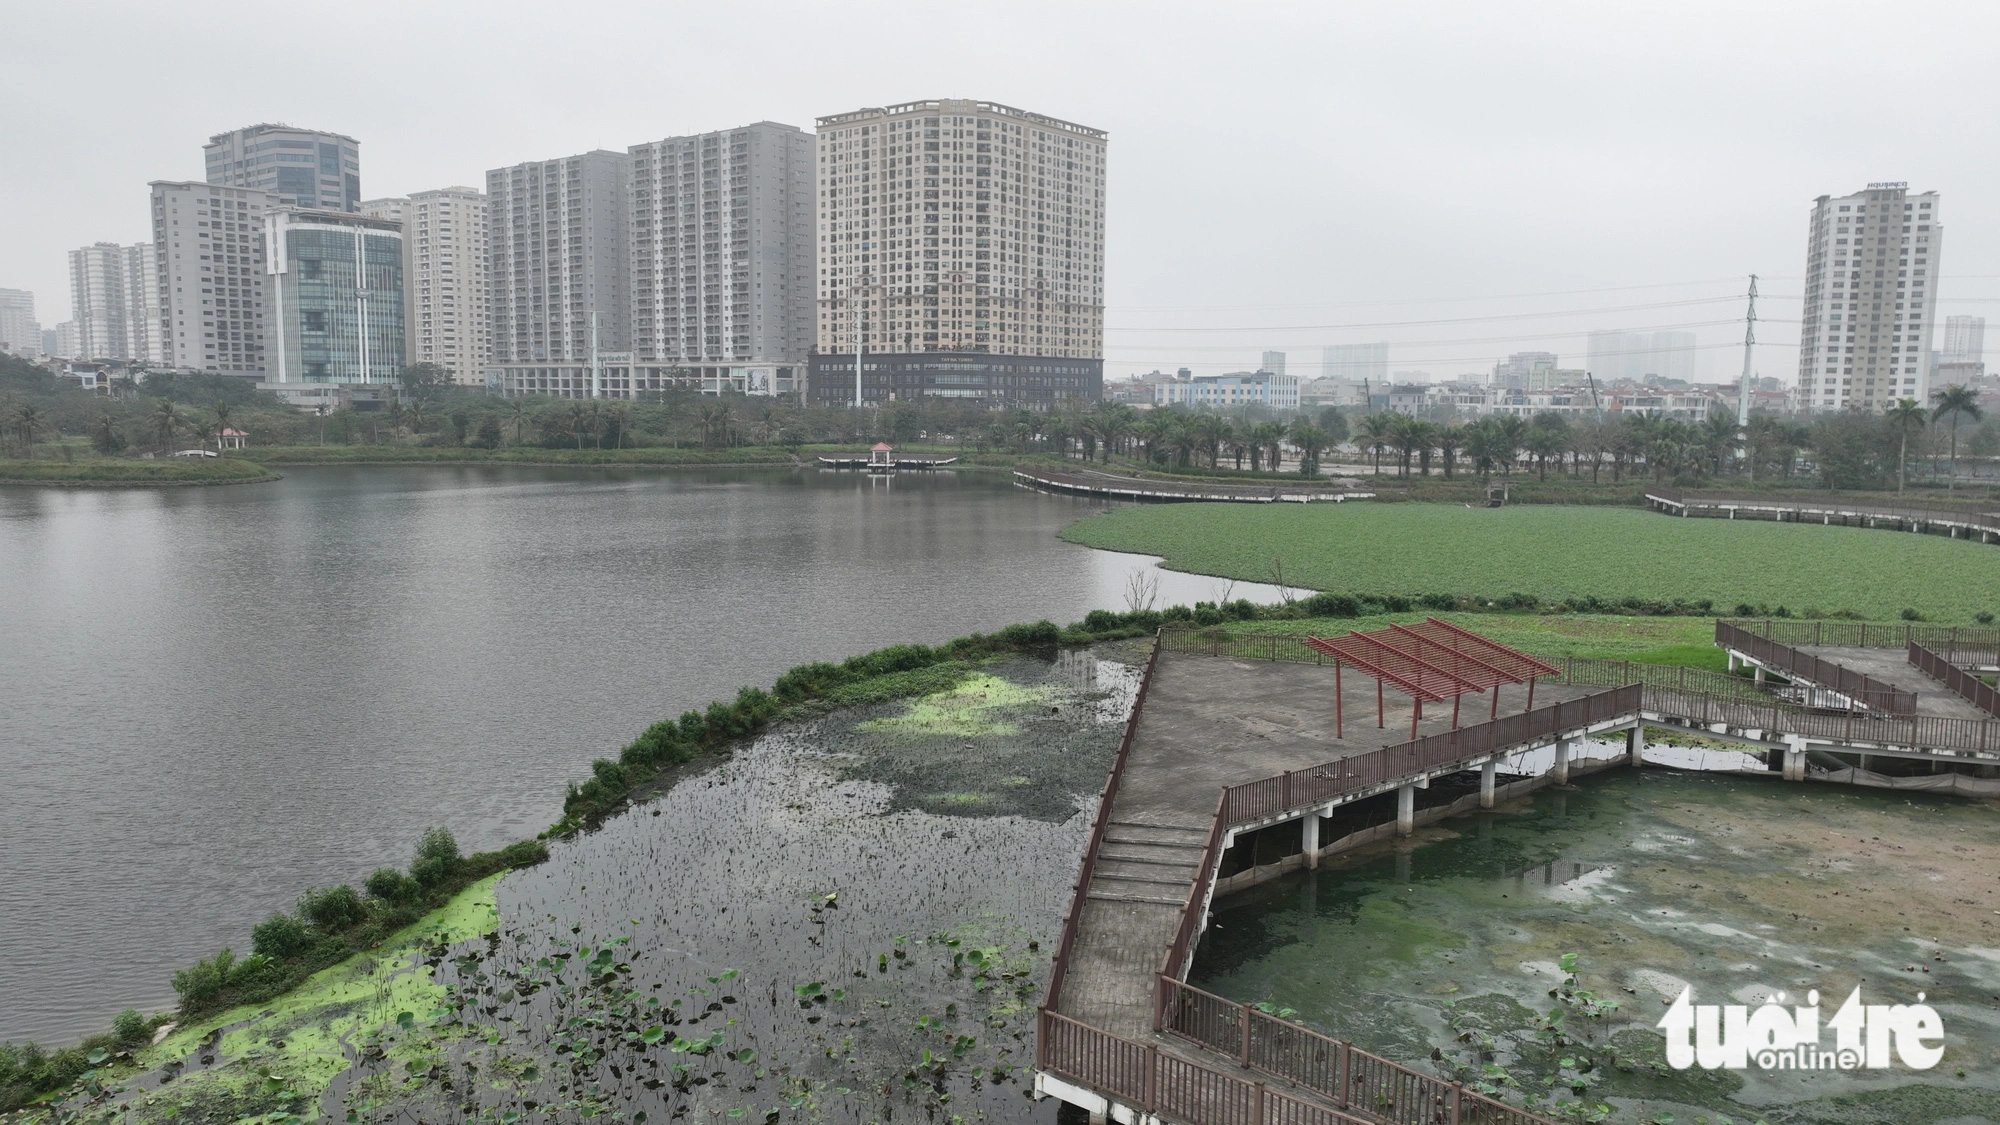 The lake within the stalled Phung Khoang Lake Park project in Nam Tu Liem District, Hanoi, is murky, covered in green moss, and emits a foul odor. Photo: Pham Tuan / Tuoi Tre